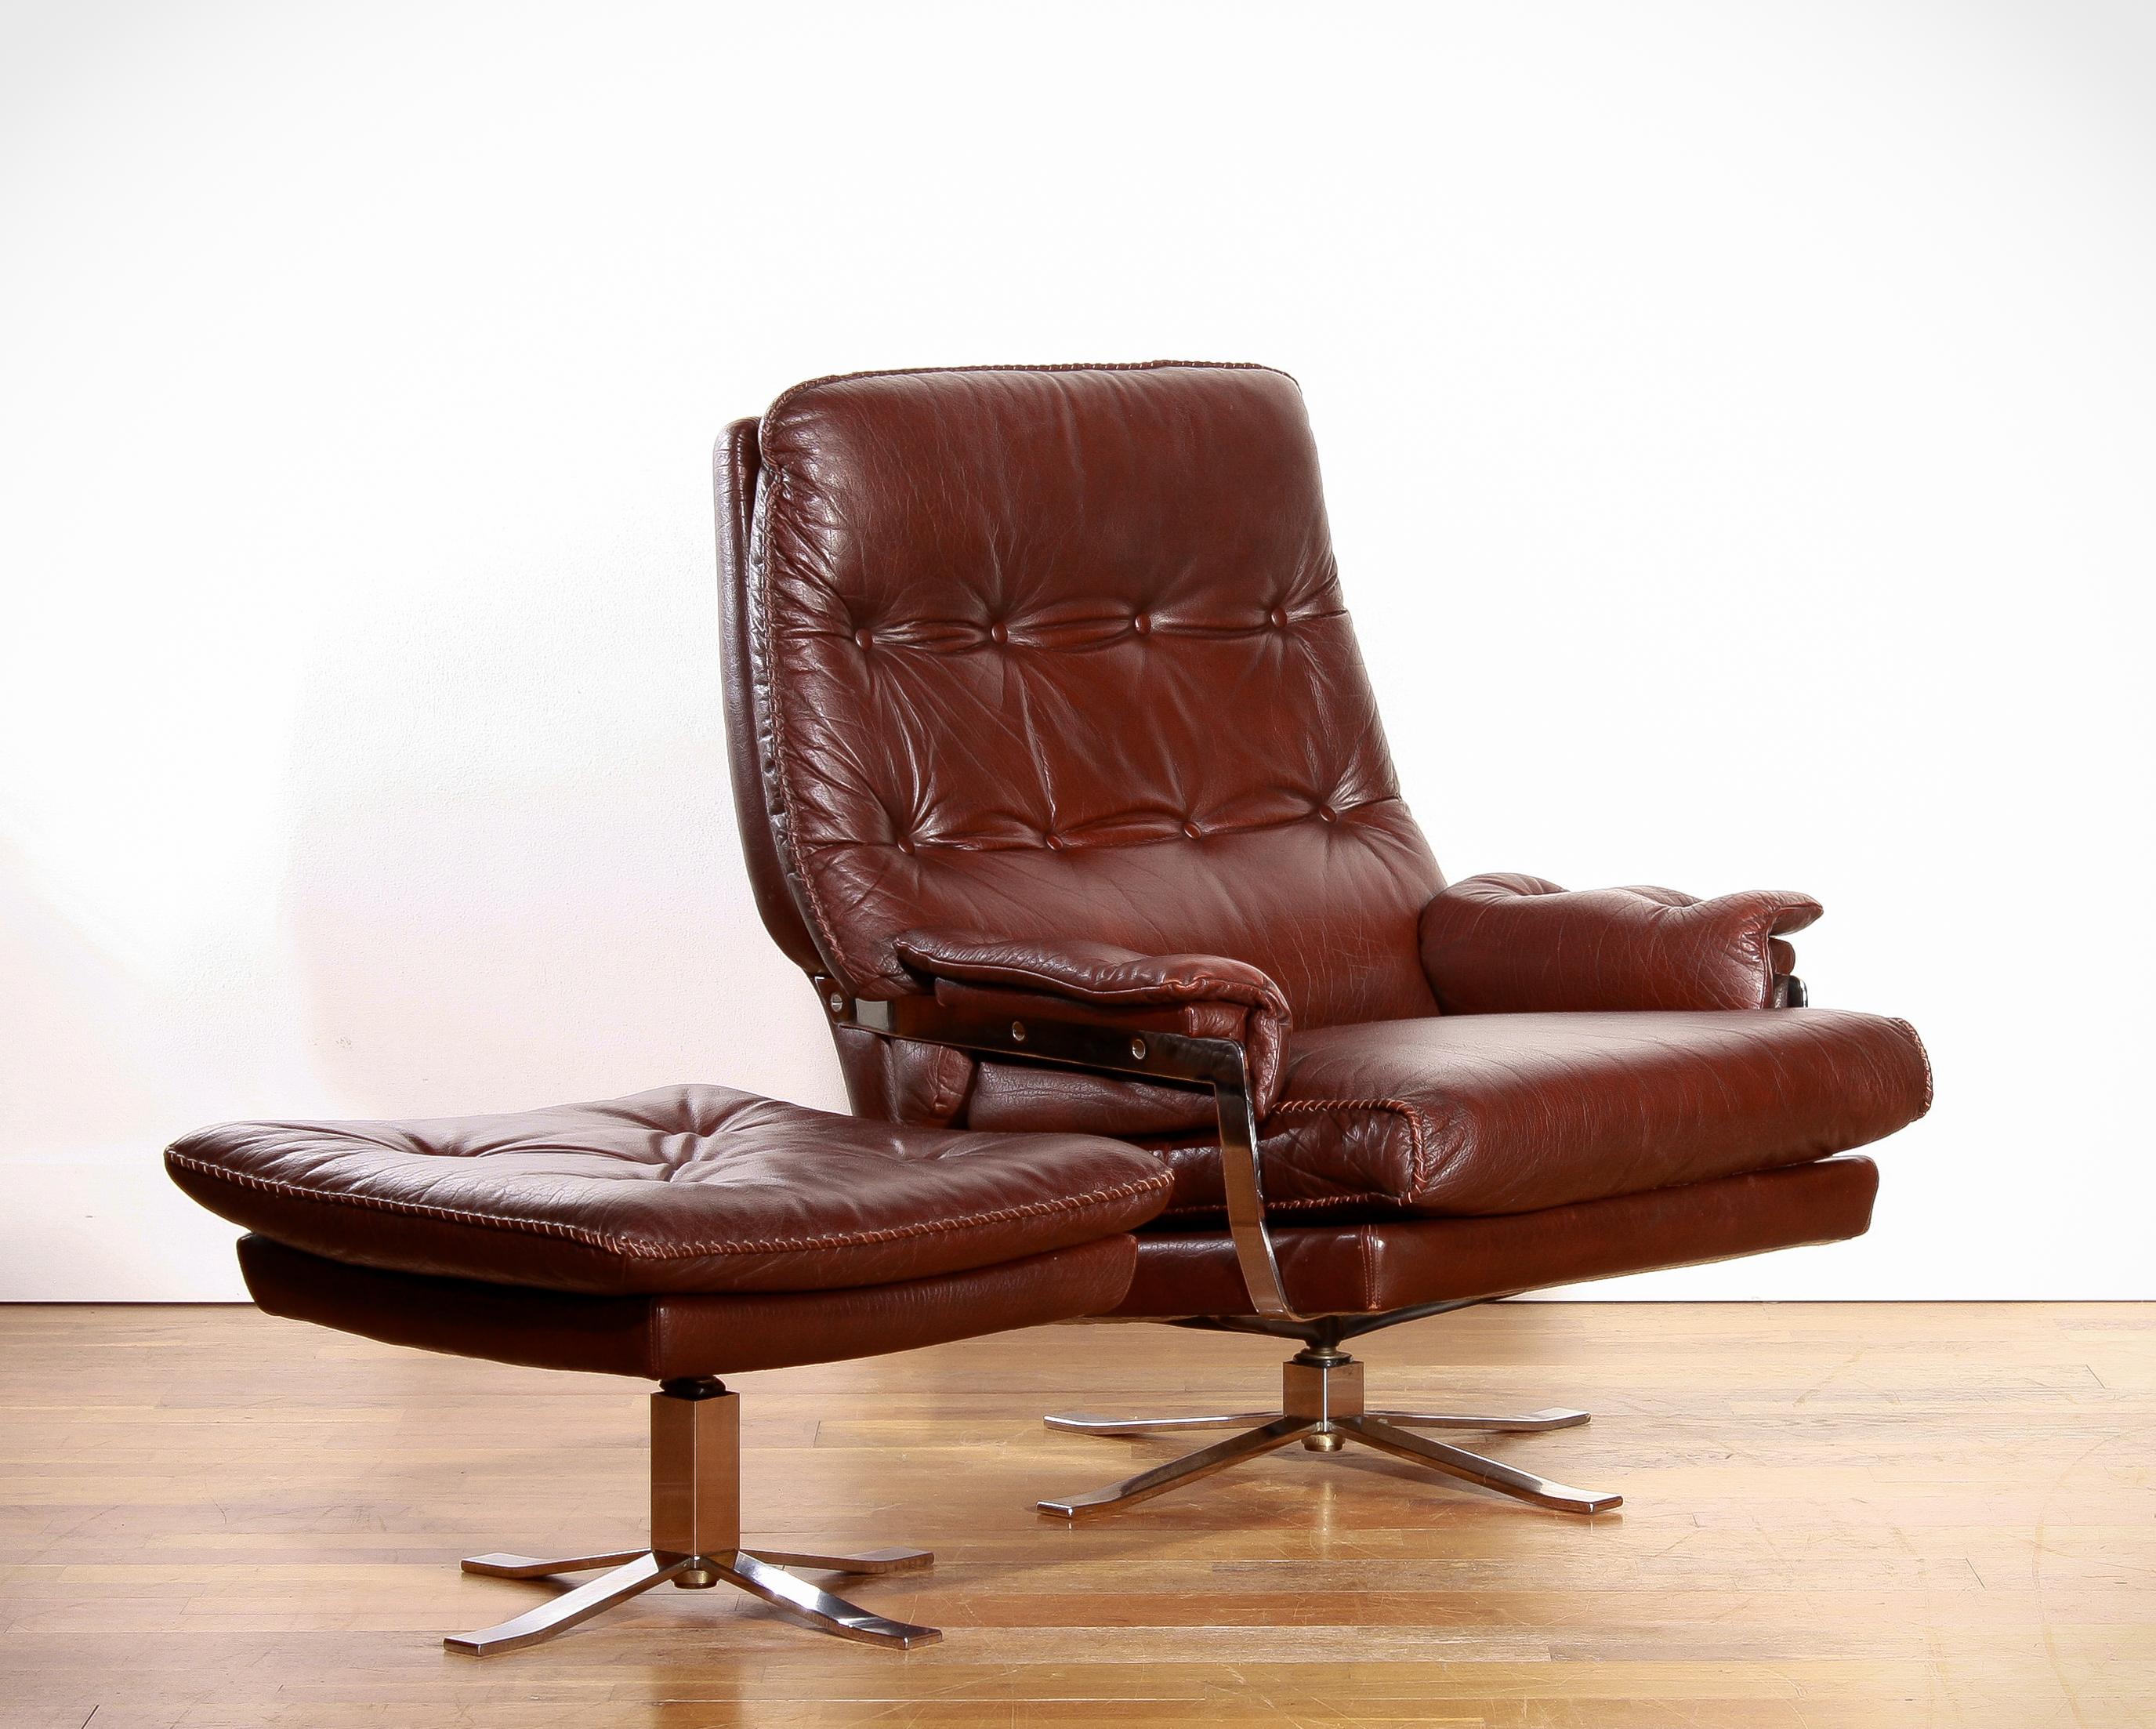 Beautiful high-quality leather lounge chair and ottoman designed by Arne Norell and produced by Vatne Møbler.
The leather is hand-stitched and in excellent condition.
Period 1960s.
   